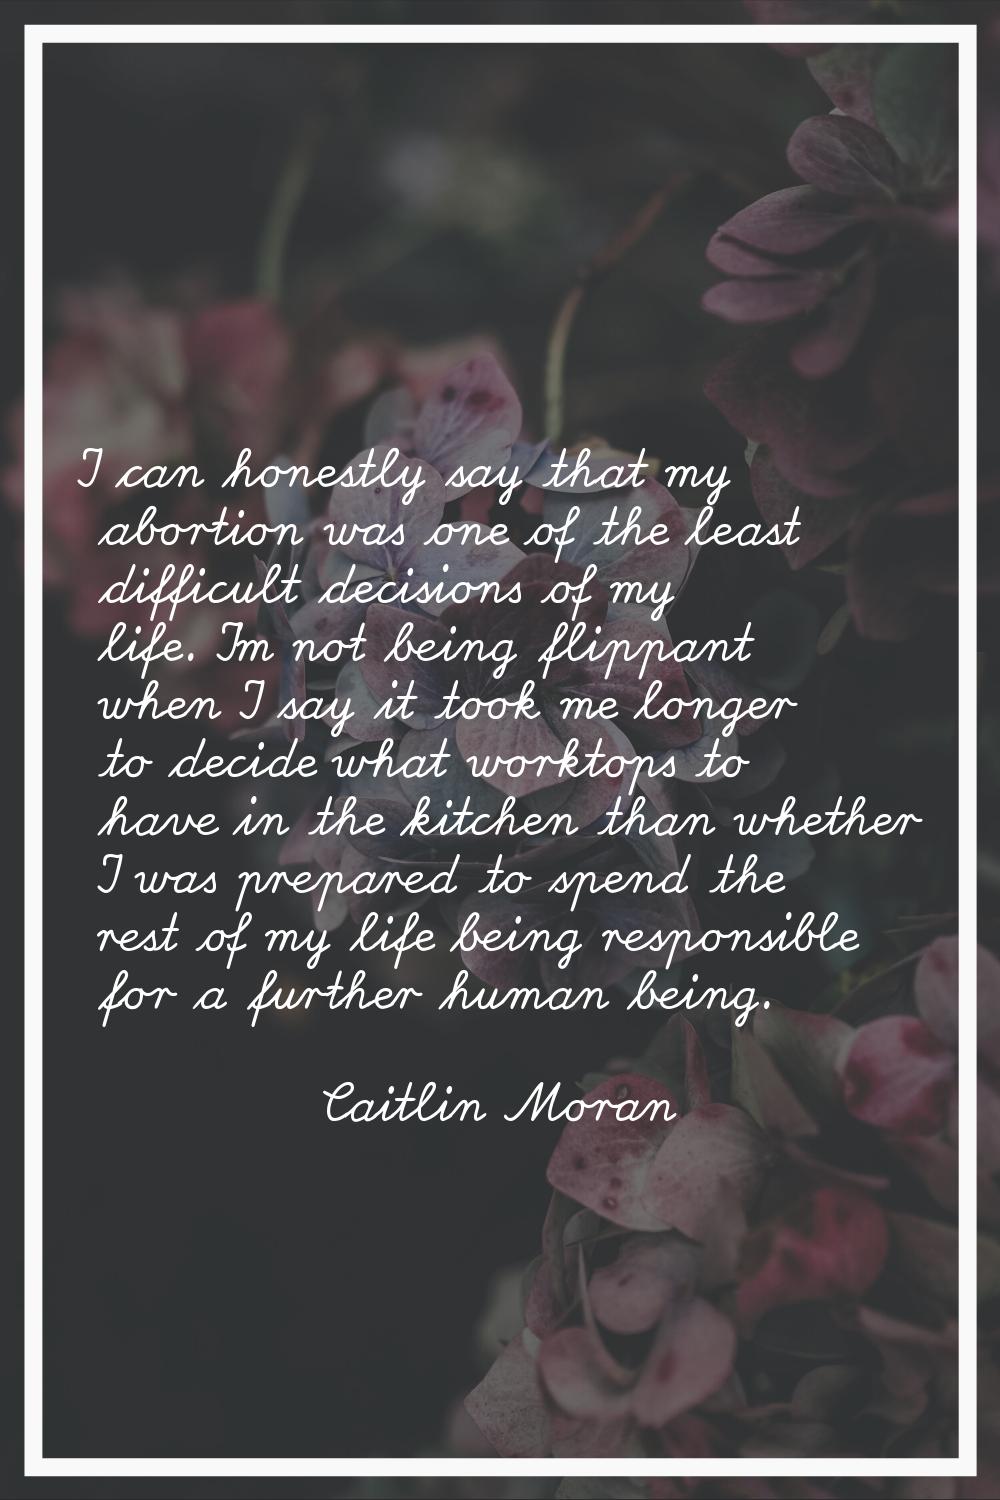 I can honestly say that my abortion was one of the least difficult decisions of my life. I'm not be